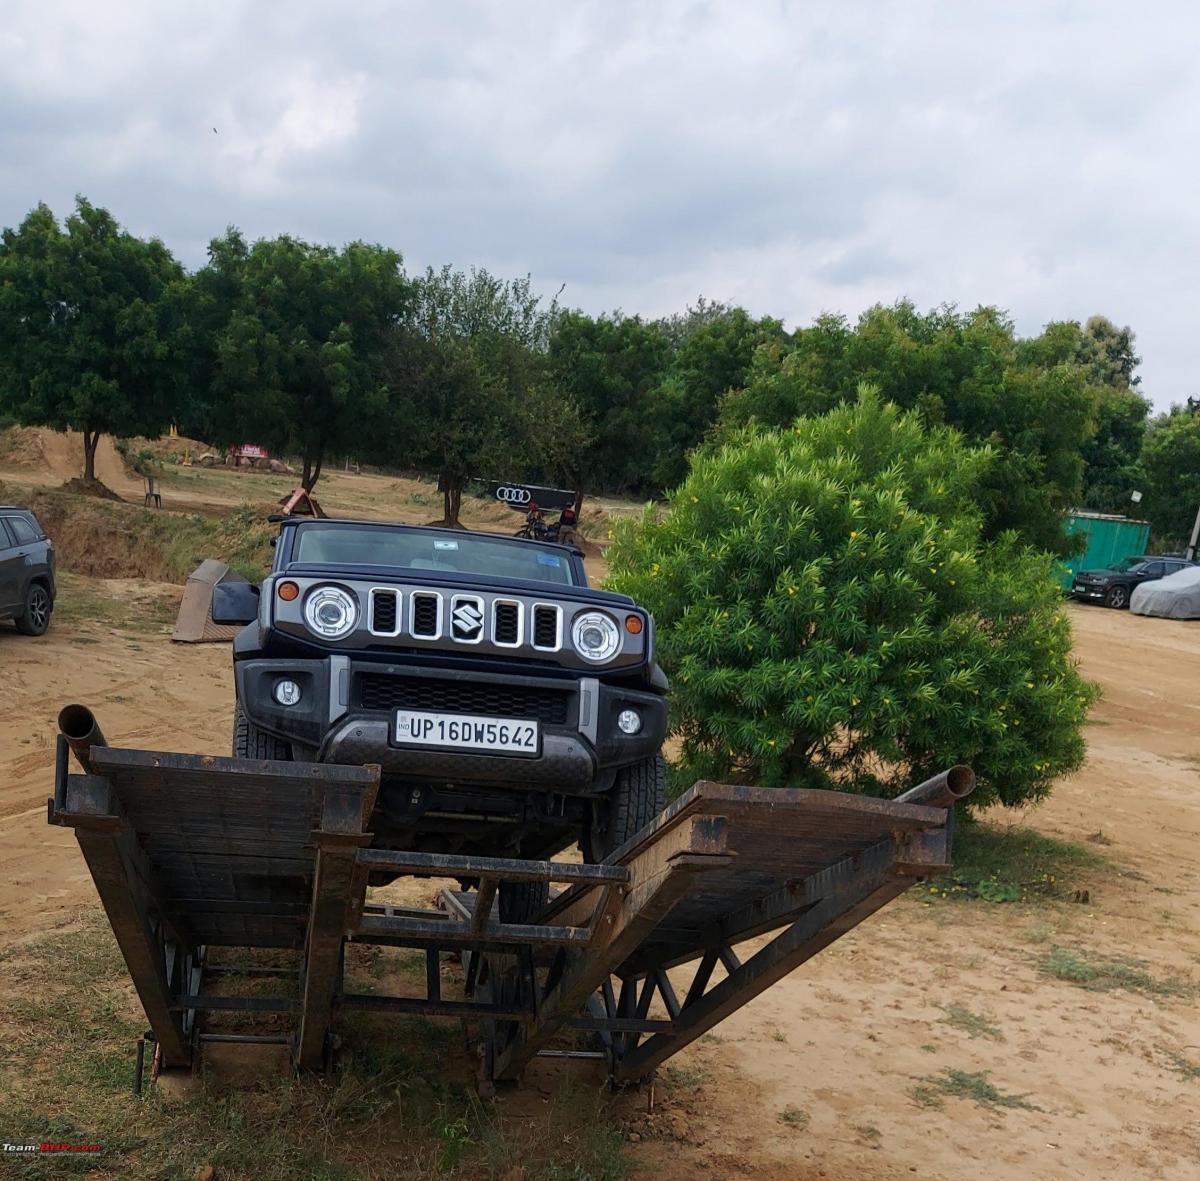 Can the Maruti Jimny be the only car in your garage? Owner explains, Indian, Maruti Suzuki, Member Content, Maruti jimny, Car ownership